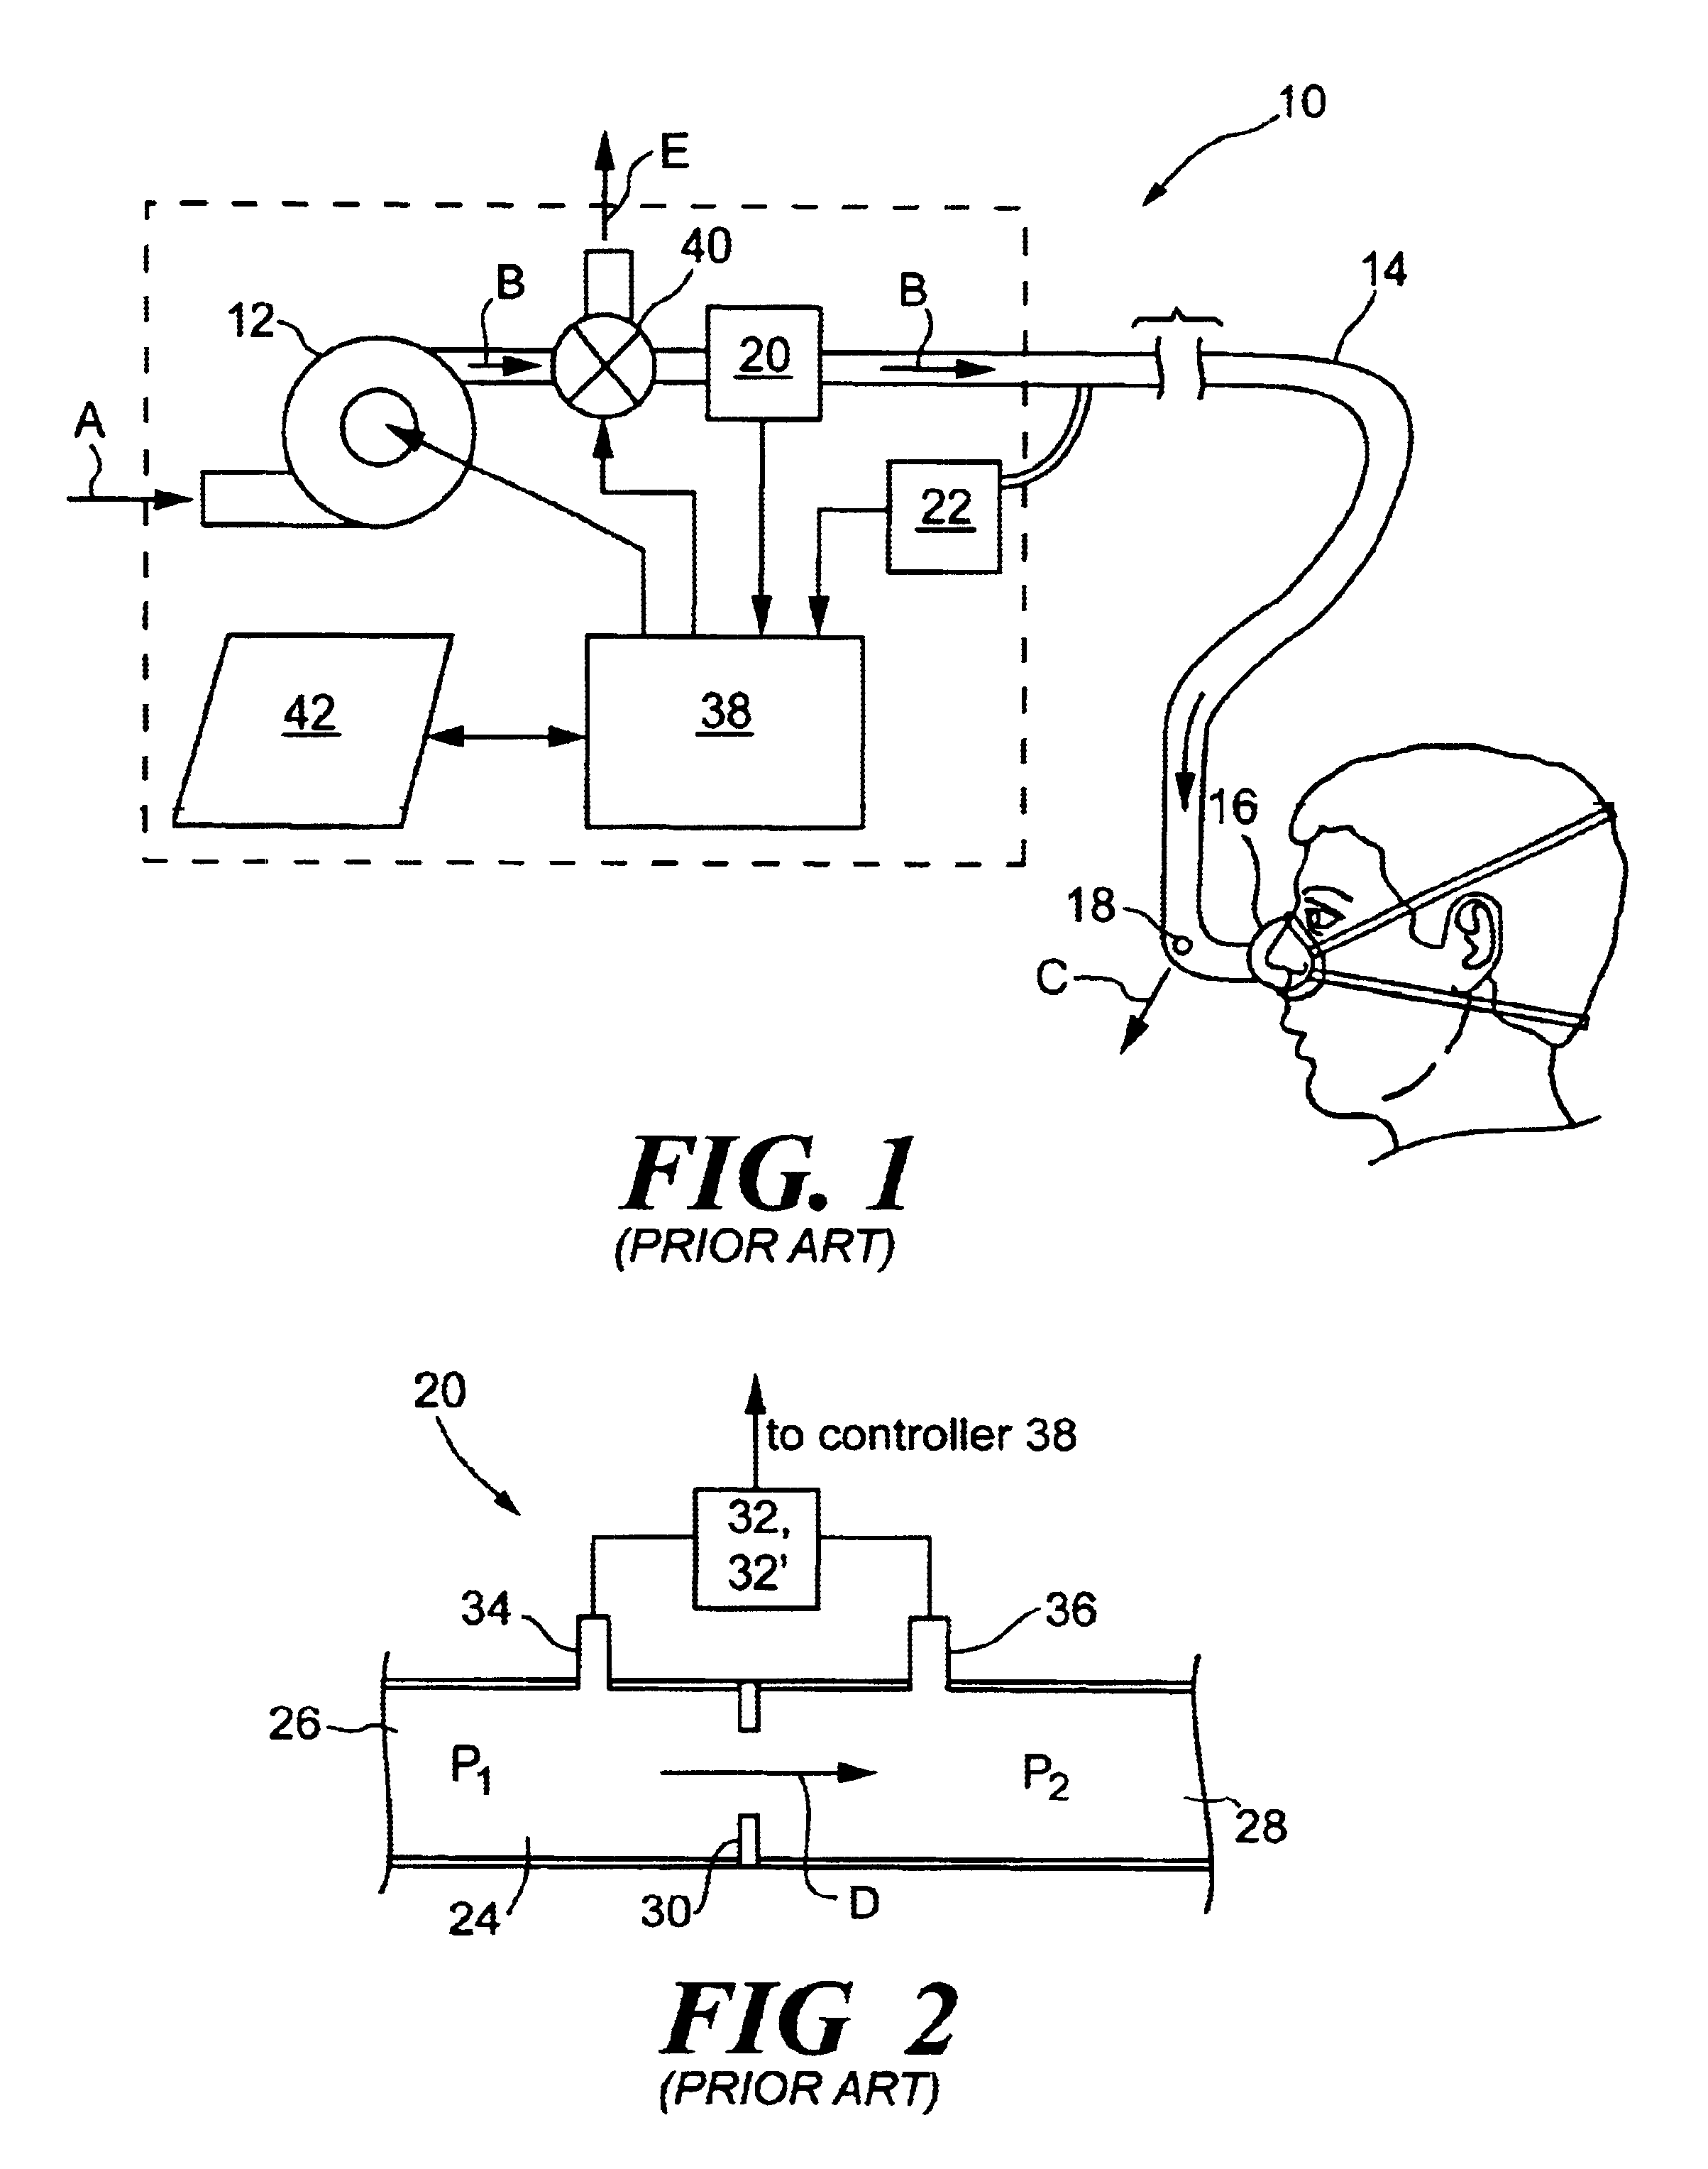 Monitoring fluid flow in a pressure support system